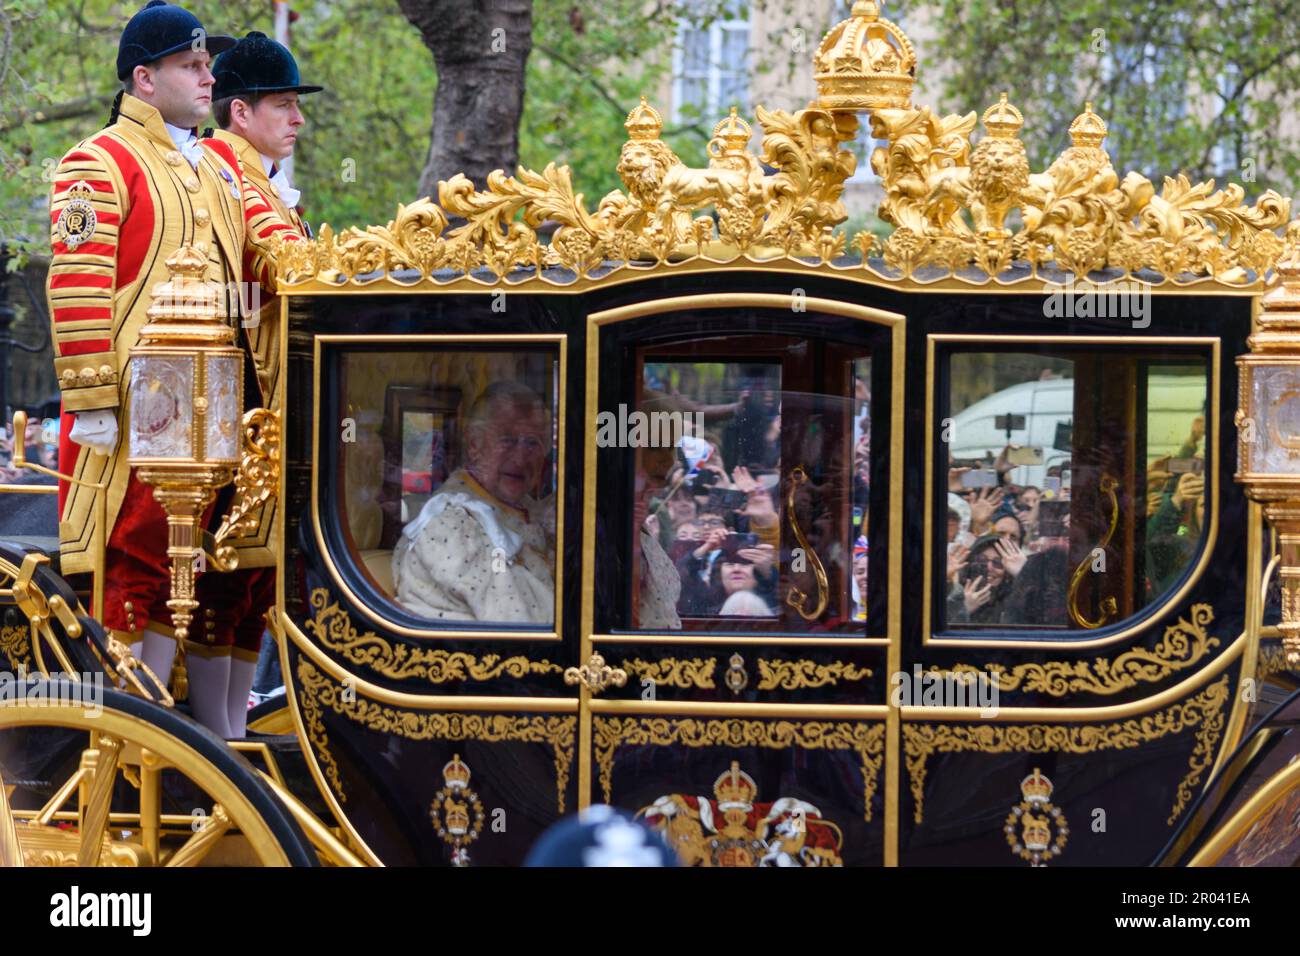 London, UK, 6. Mai 2023, The Coronation of King Charles III. Findet in Westminster Abbey statt, Andrew Lalchan Photography/Alamy Live News Stockfoto